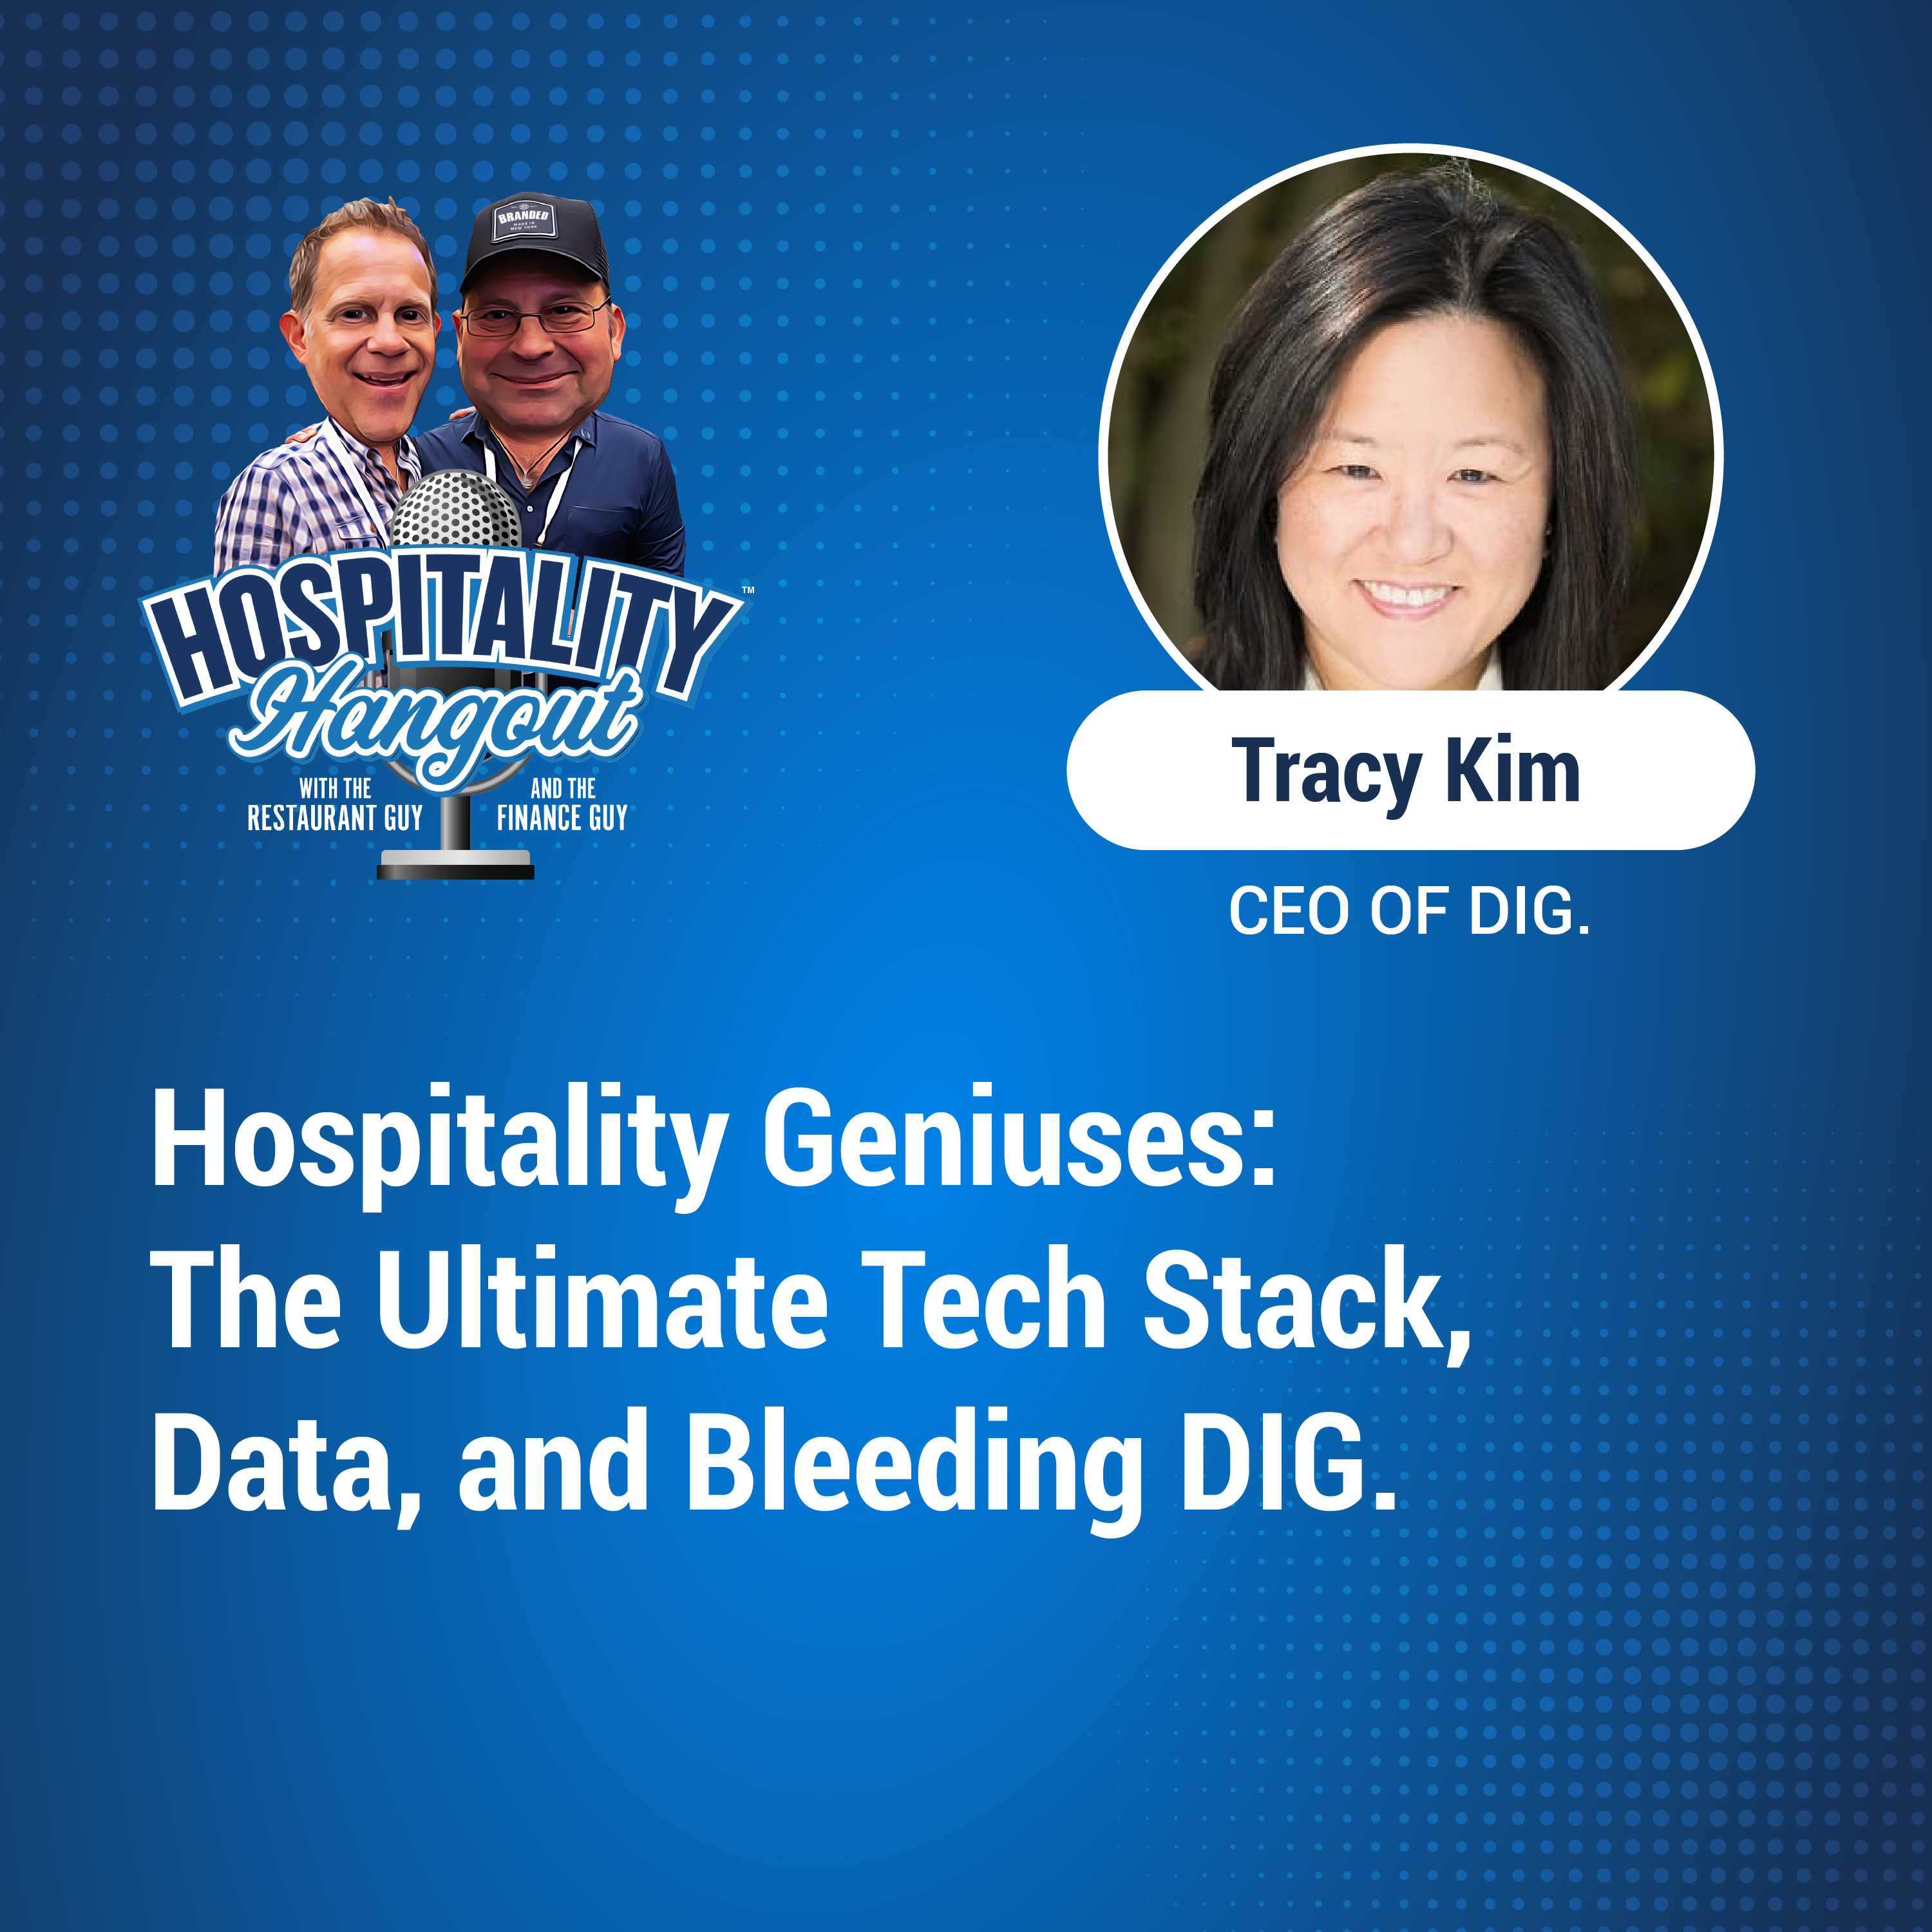 Hospitality Geniuses: The Ultimate Tech Stack, Data, and Bleeding DIG.